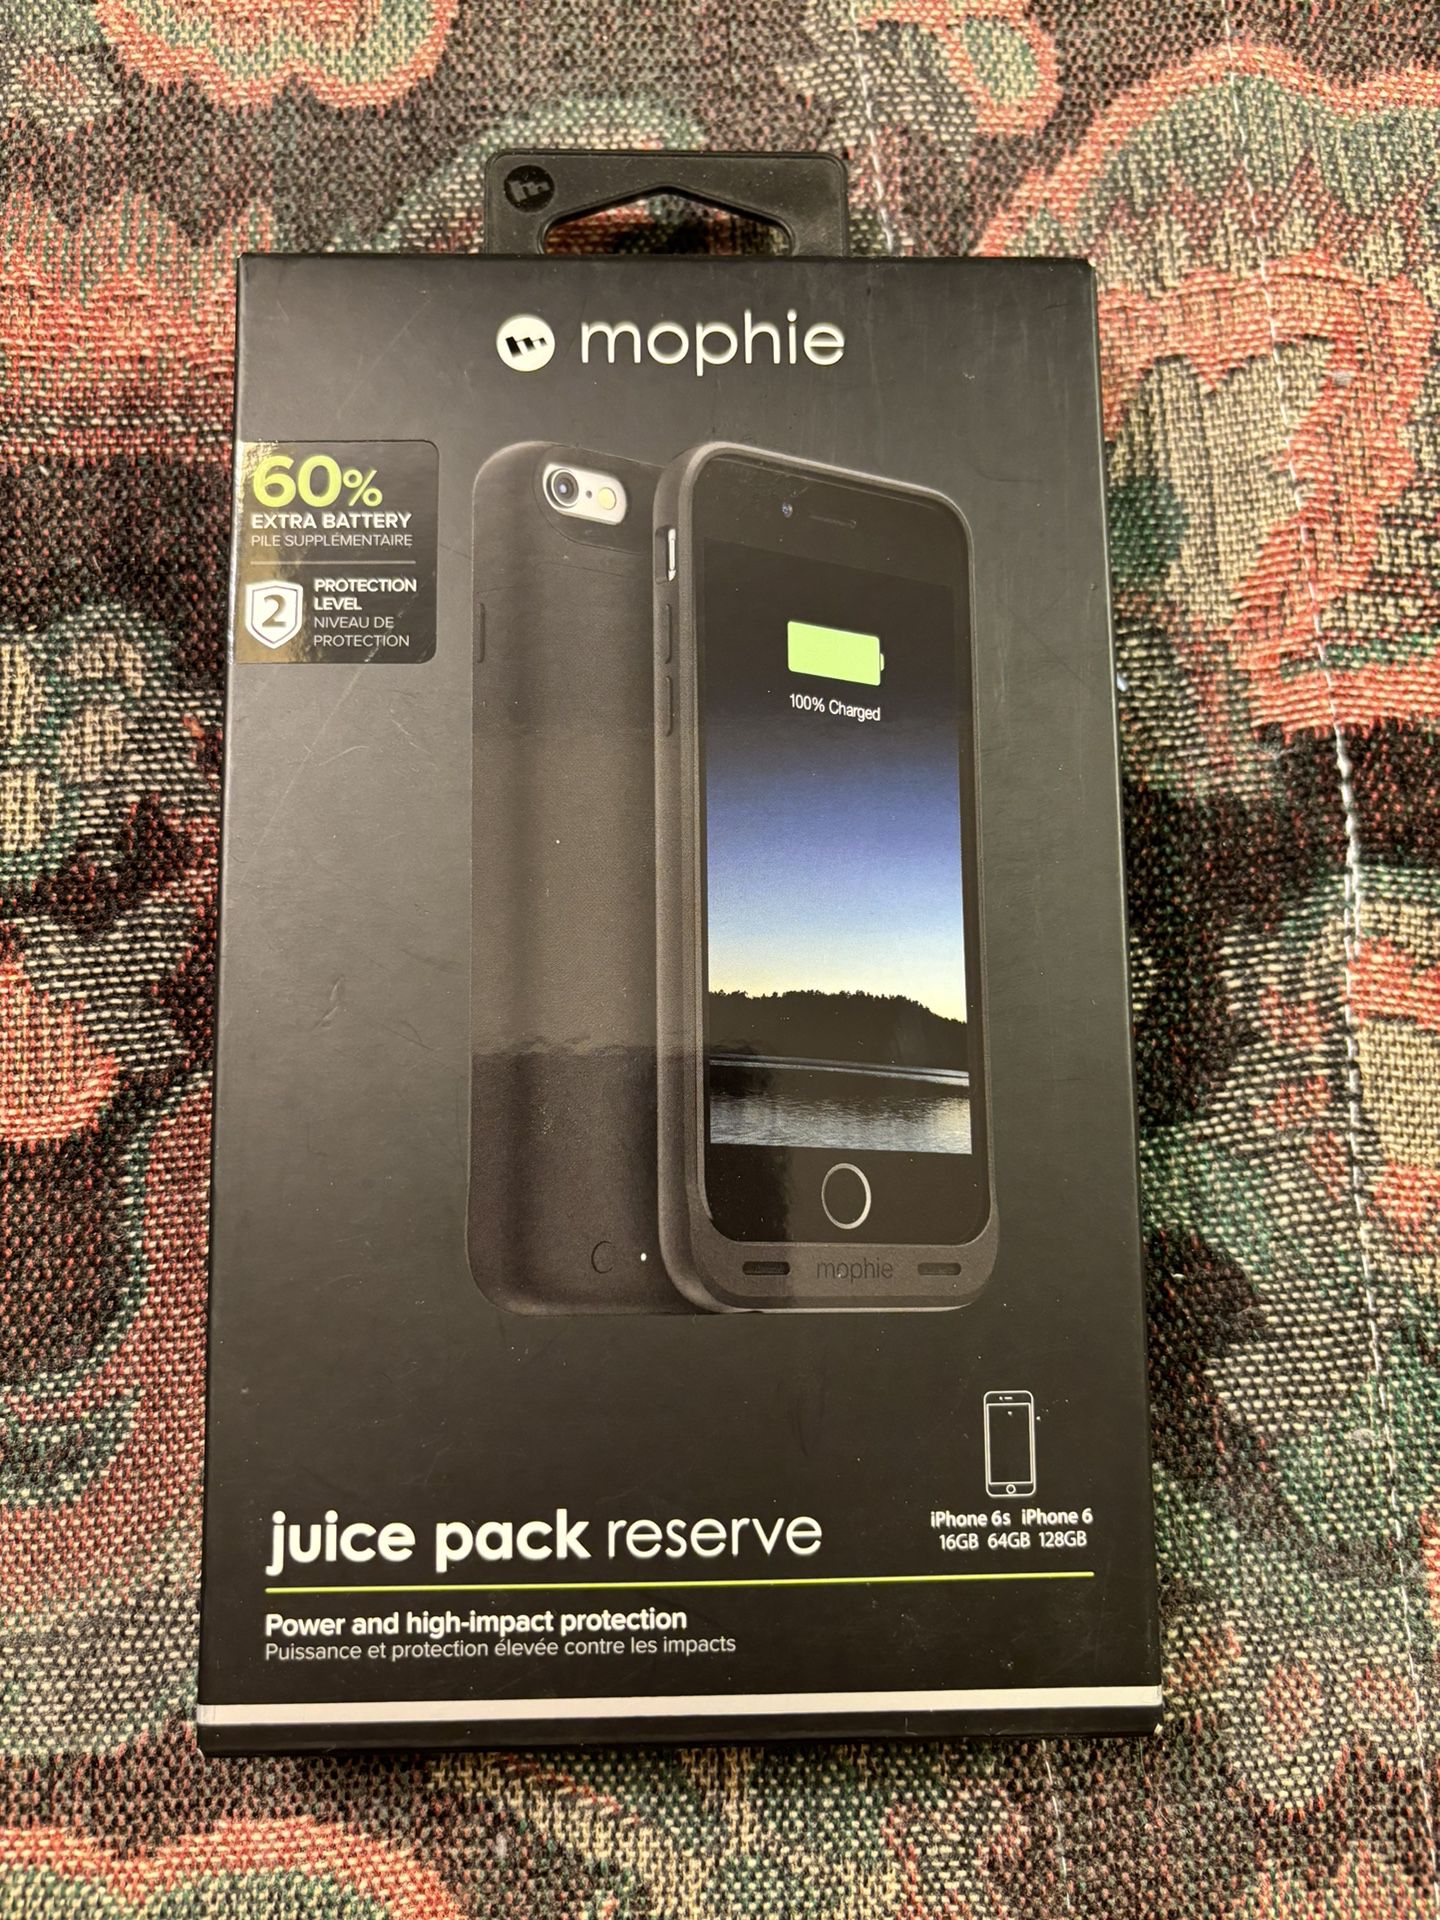 mophie juice pack reserve for iPhone 6/6s